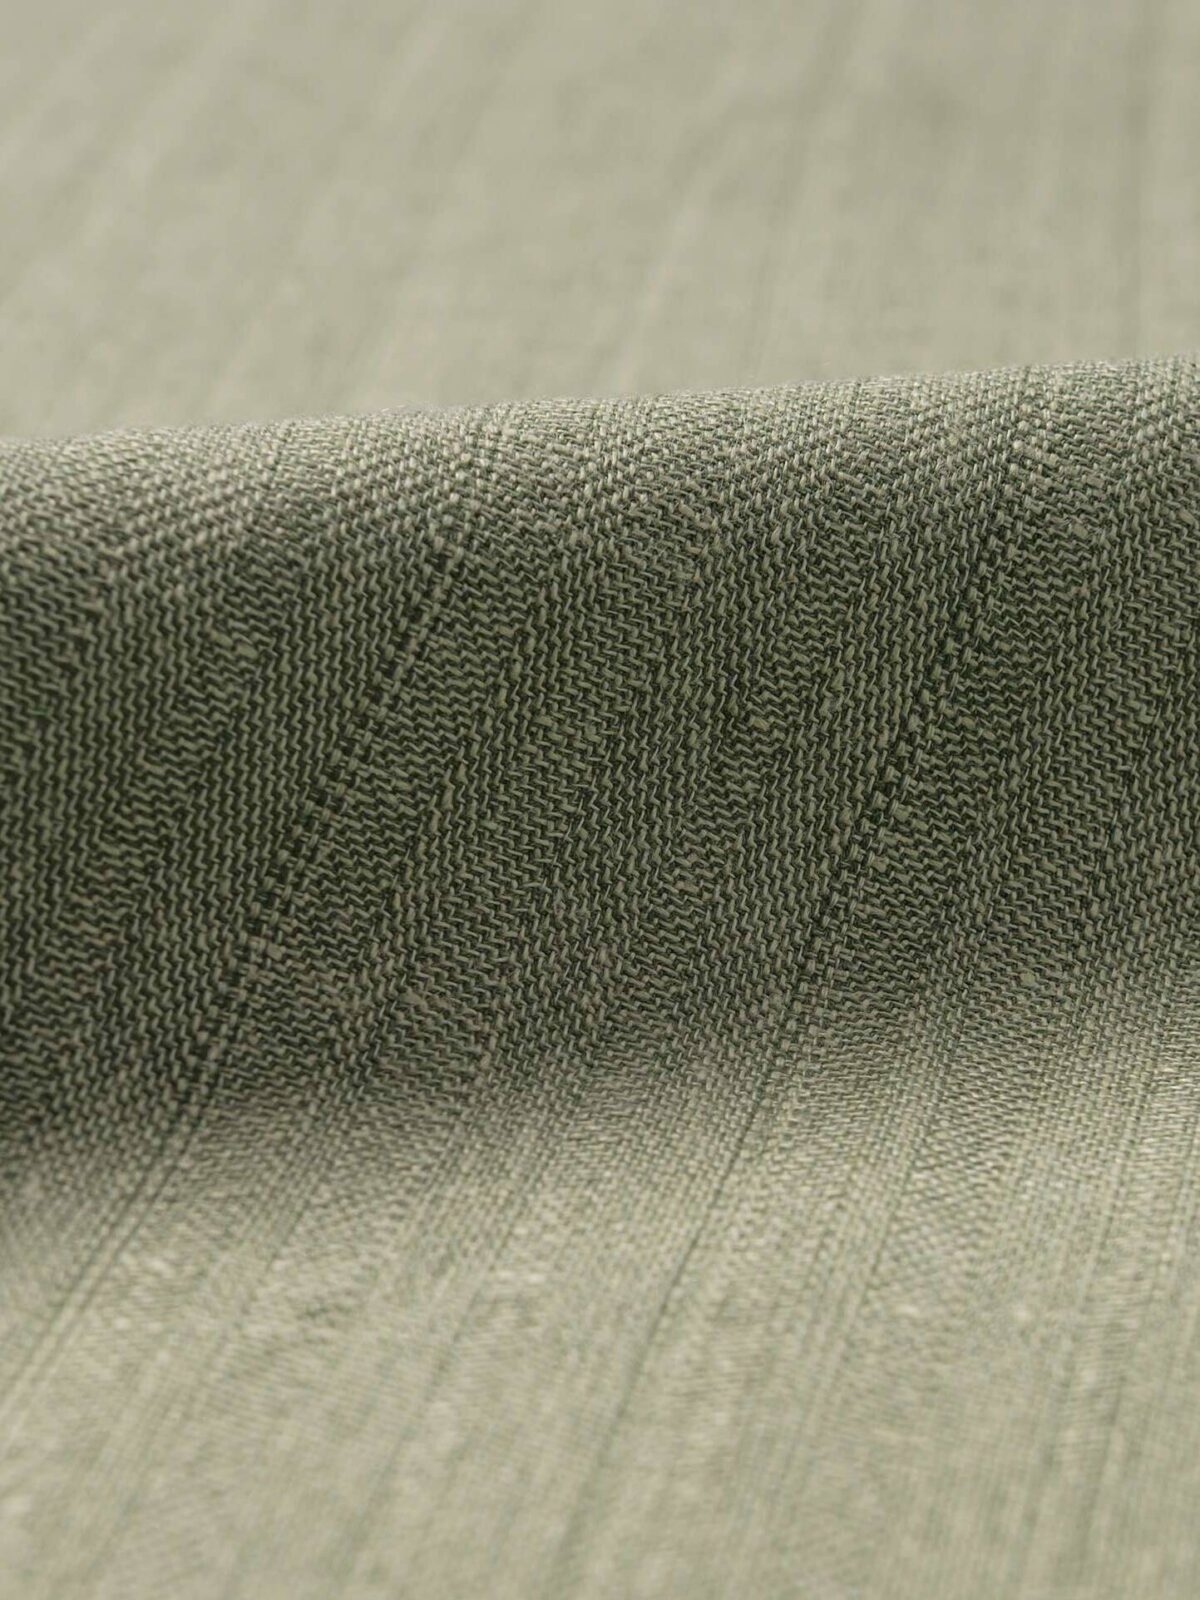 Sage & Ivory Striped Dobby Fabric, Leafy Stems, 100% Cotton, Duck